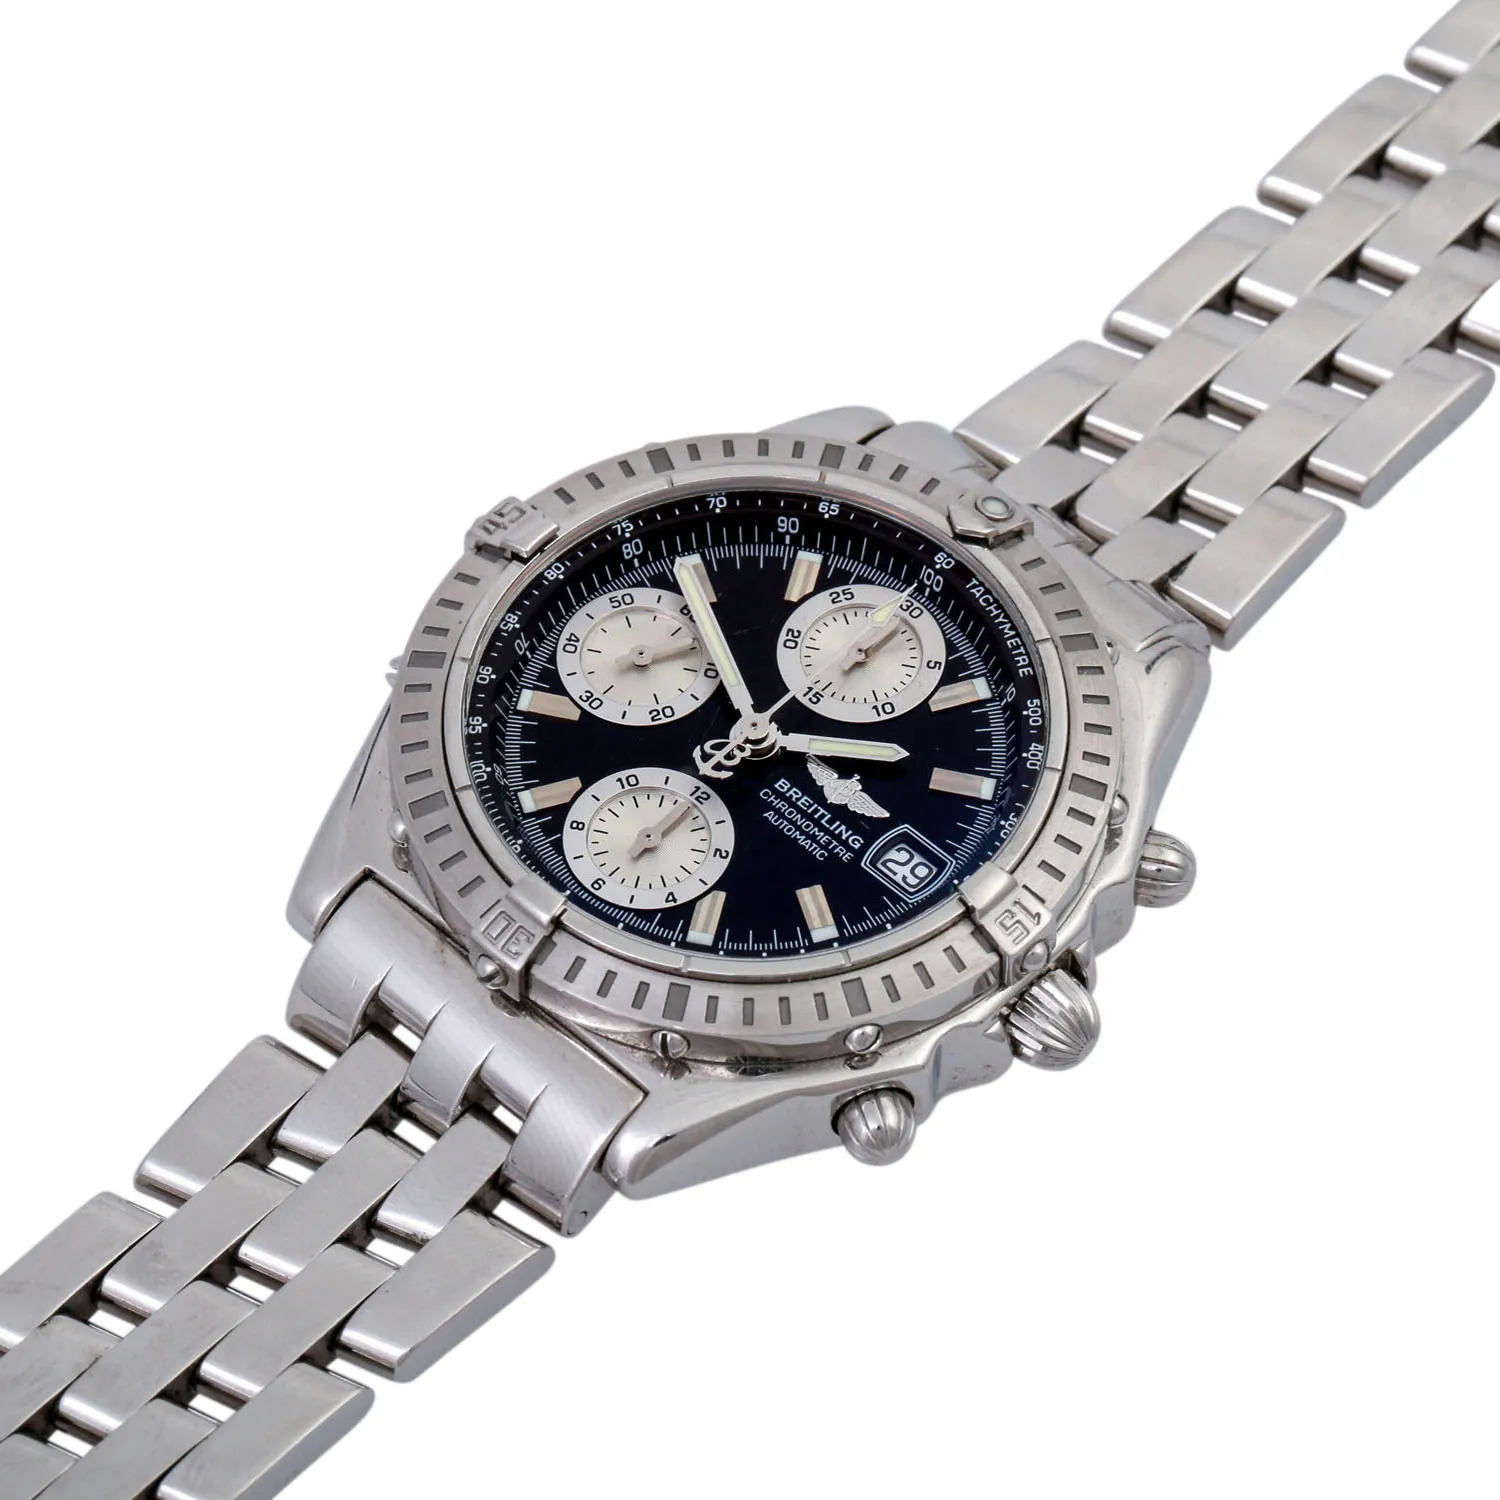 Breitling Chronomat A13352 38mm Stainless steel bi-color black and silver 3